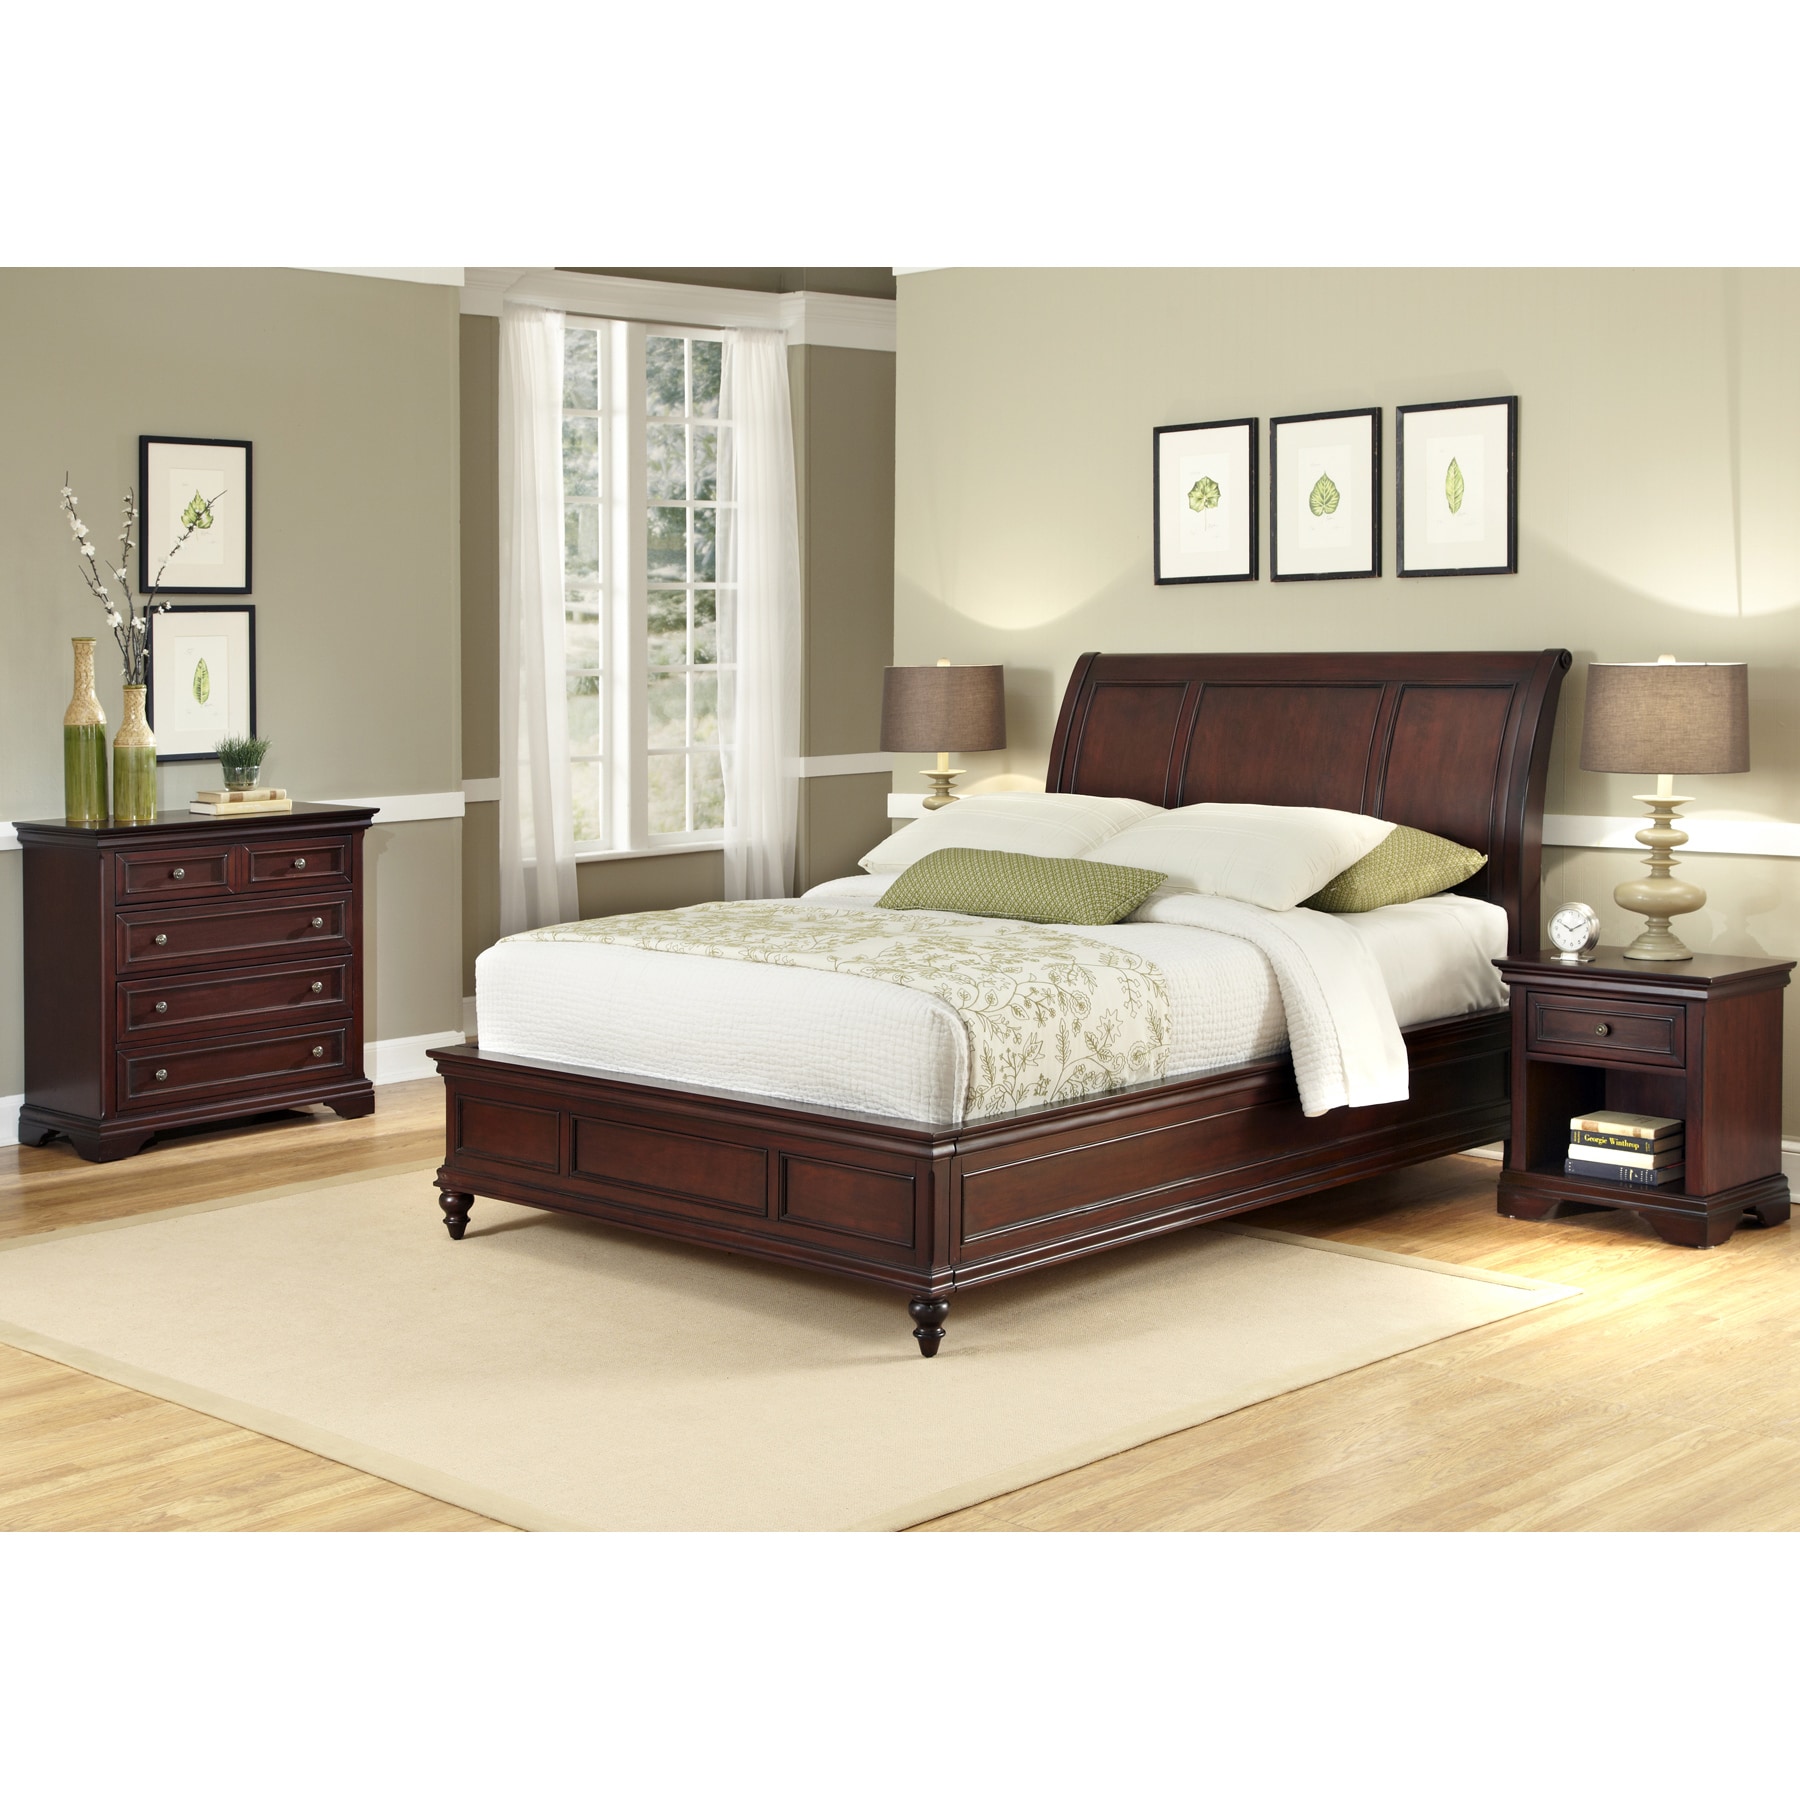 Home Styles Lafayette Full Queen Bedroom Set Free Shipping